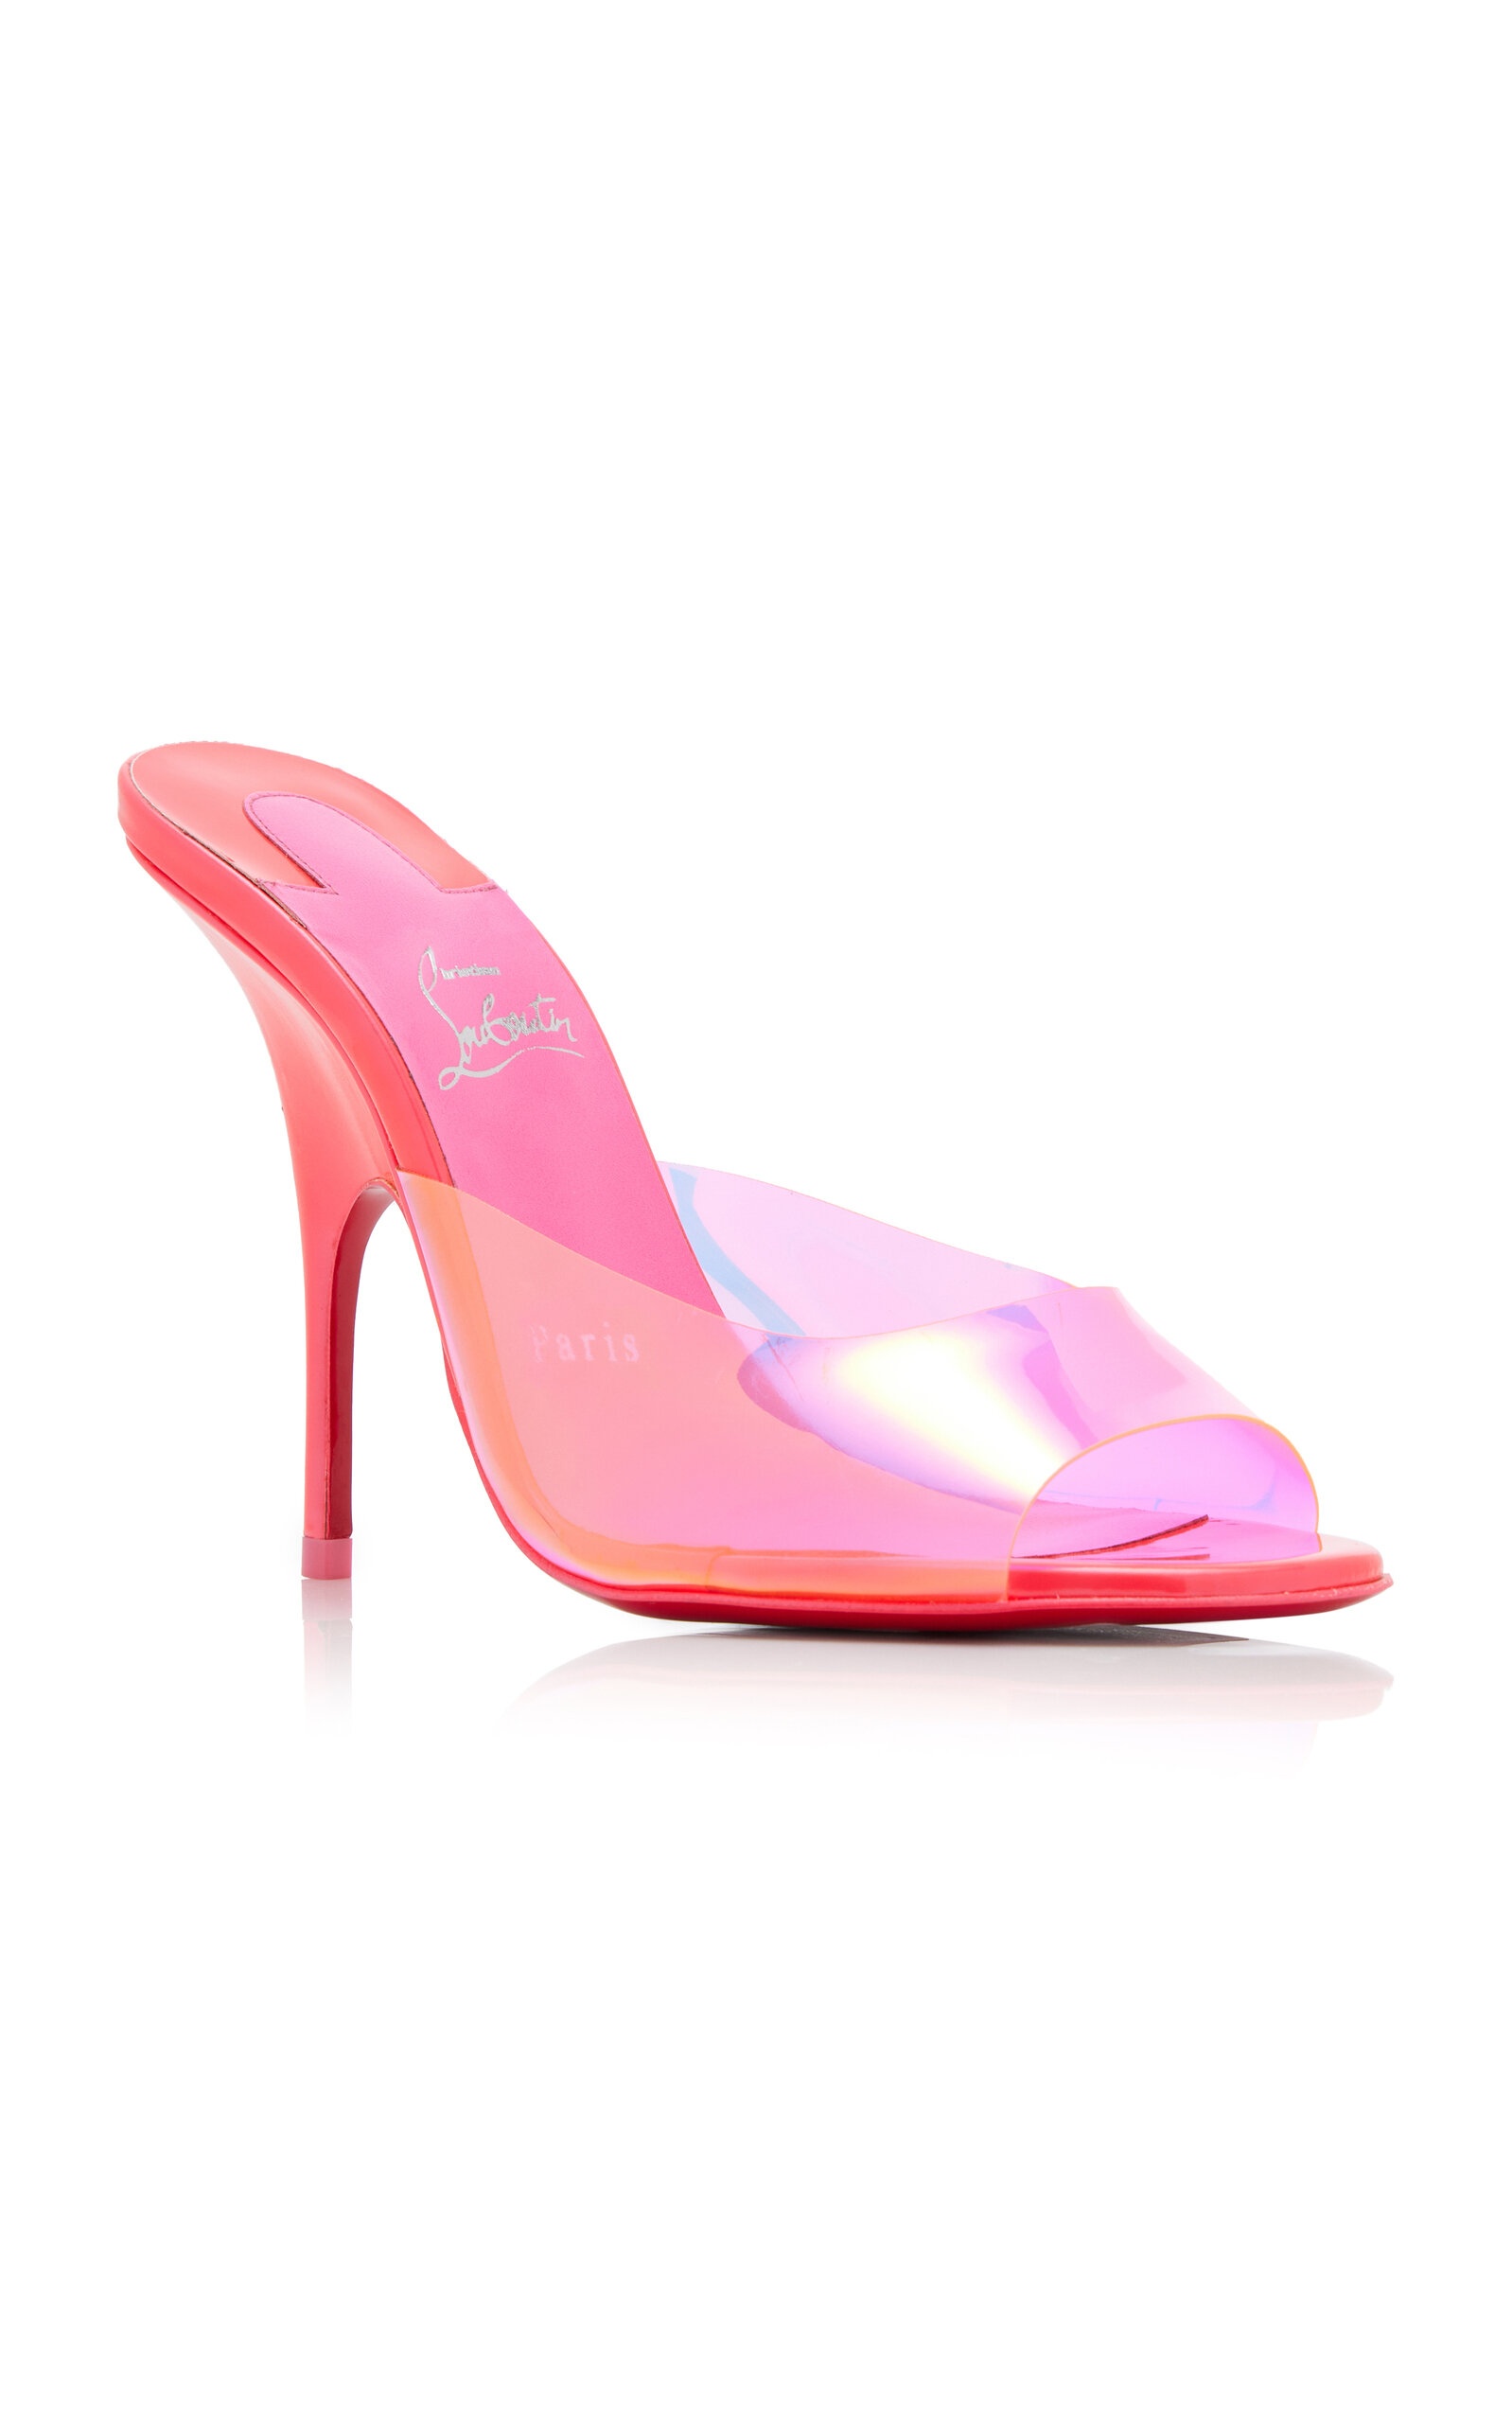 Just Arch Patent Leather and PVC Sandals pink - 4